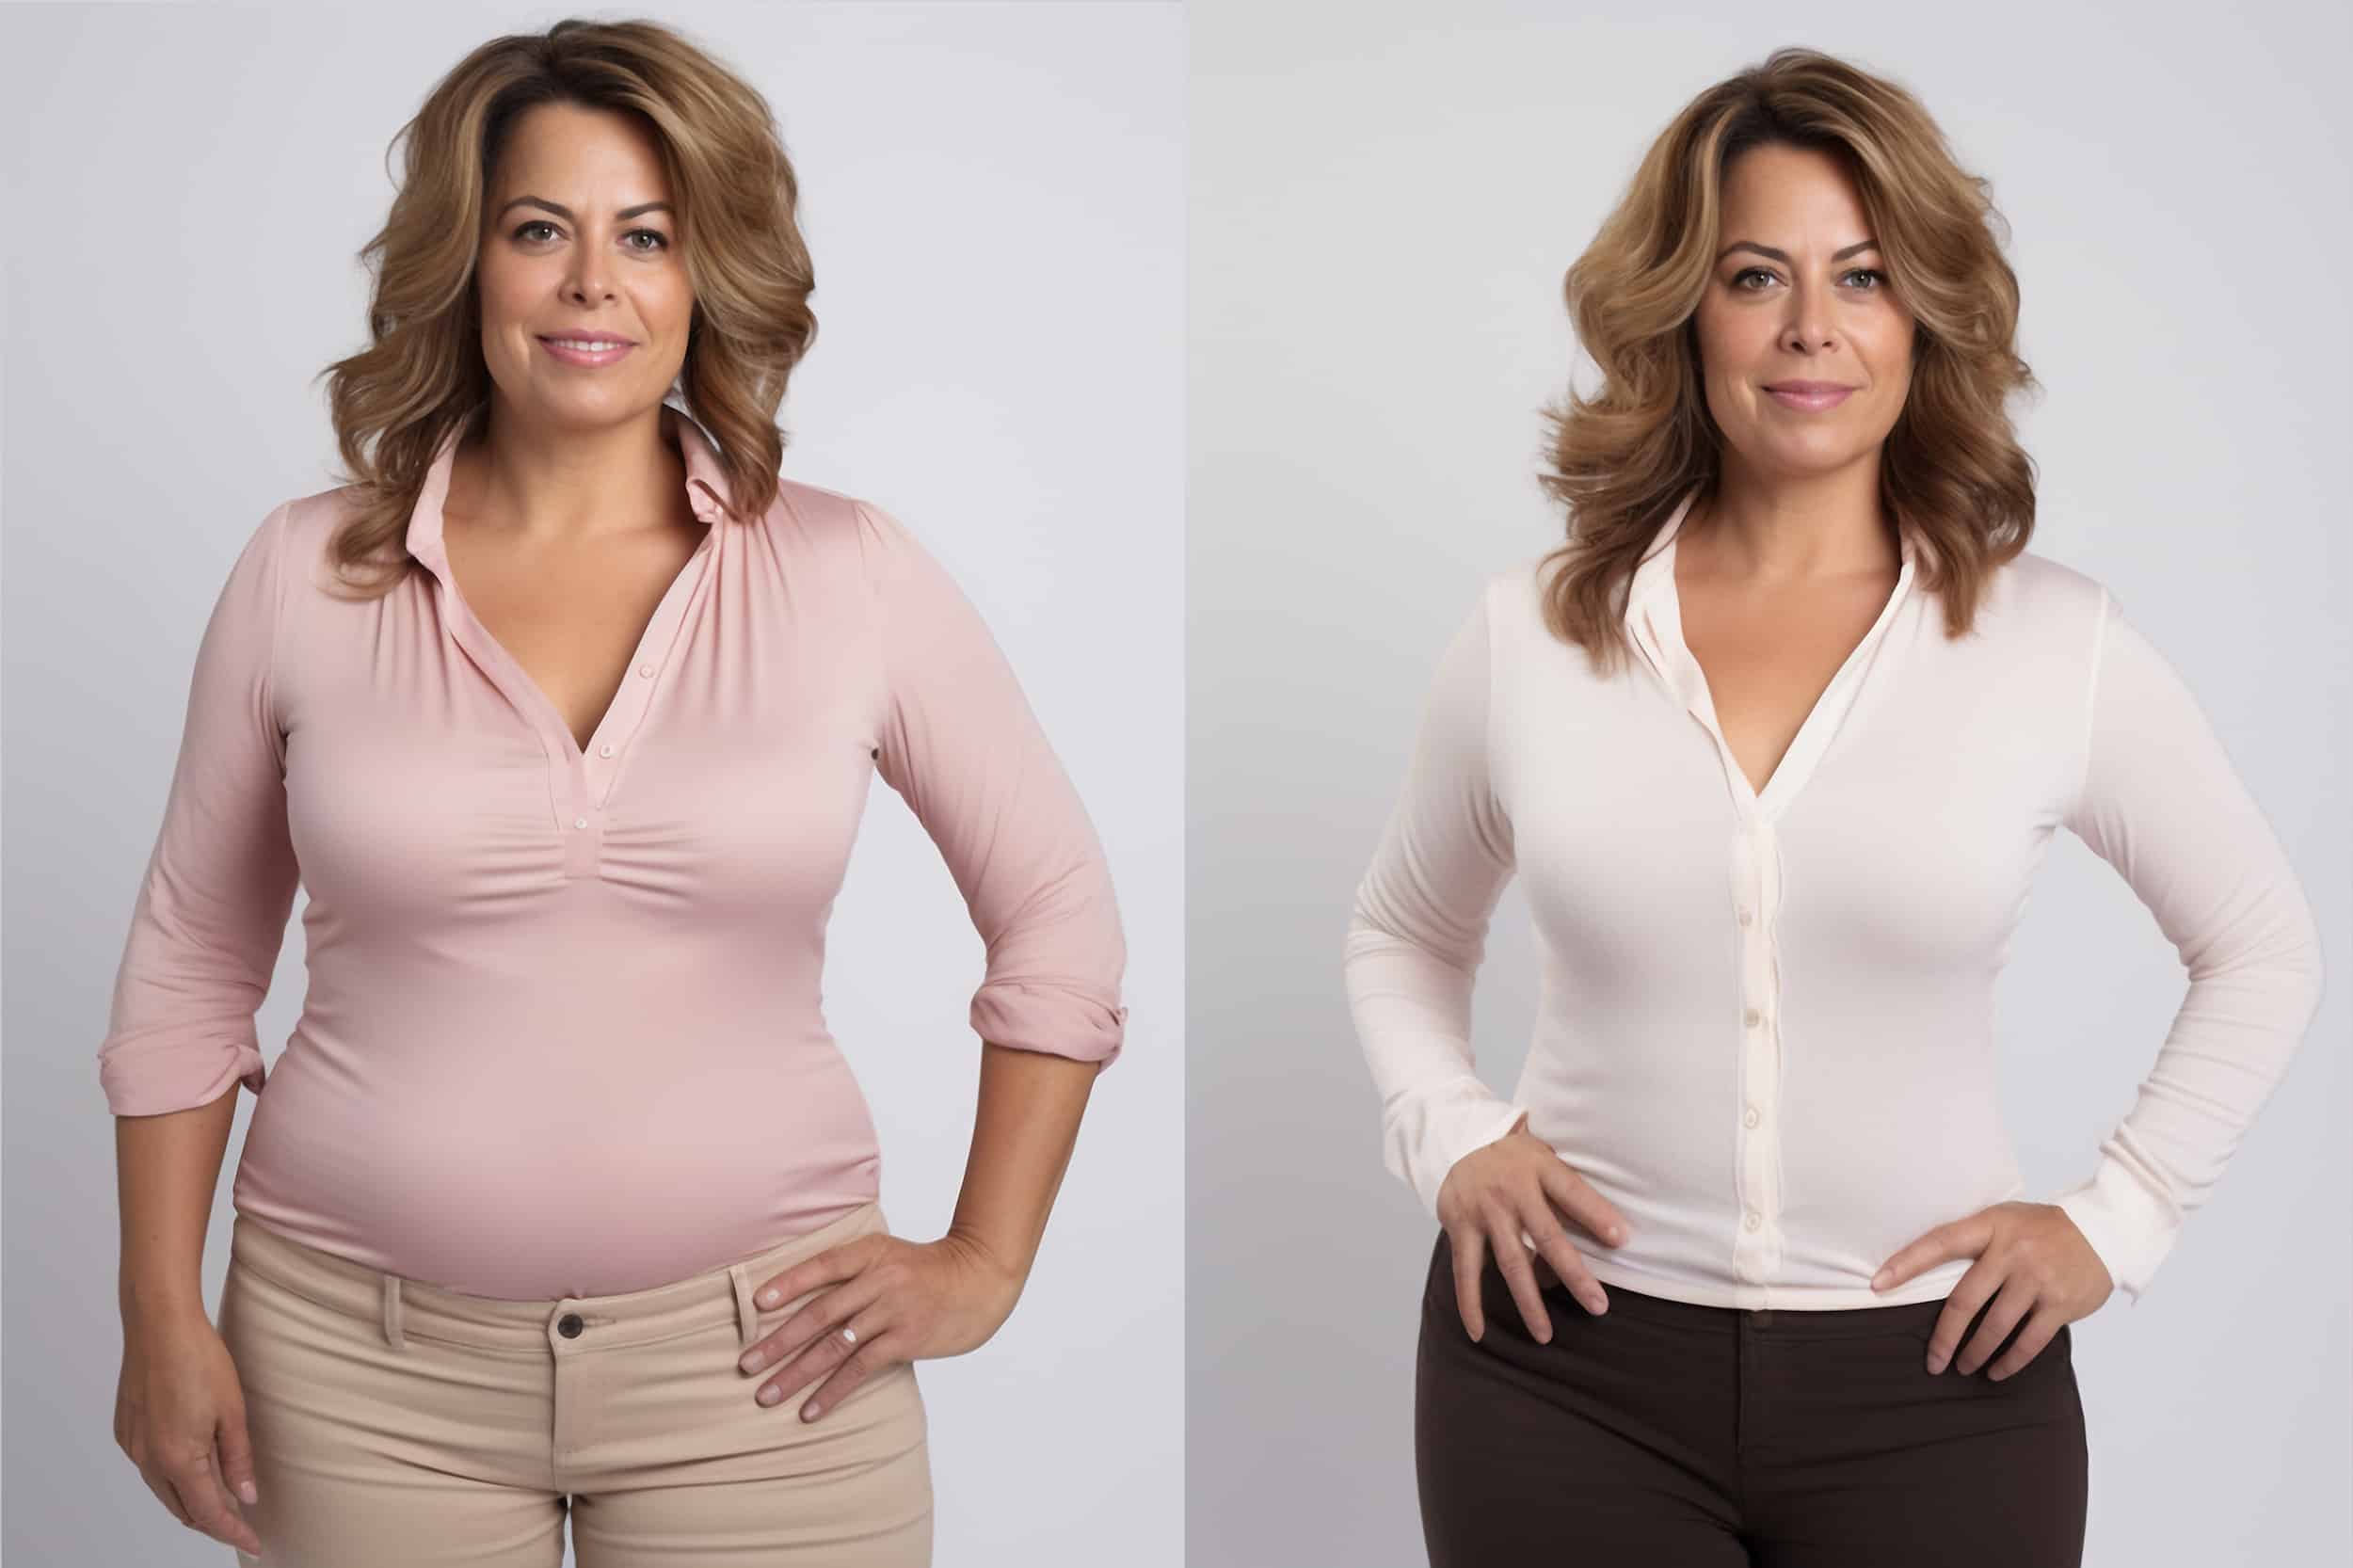 Before-and-after photos illustrating drug-free weight loss success